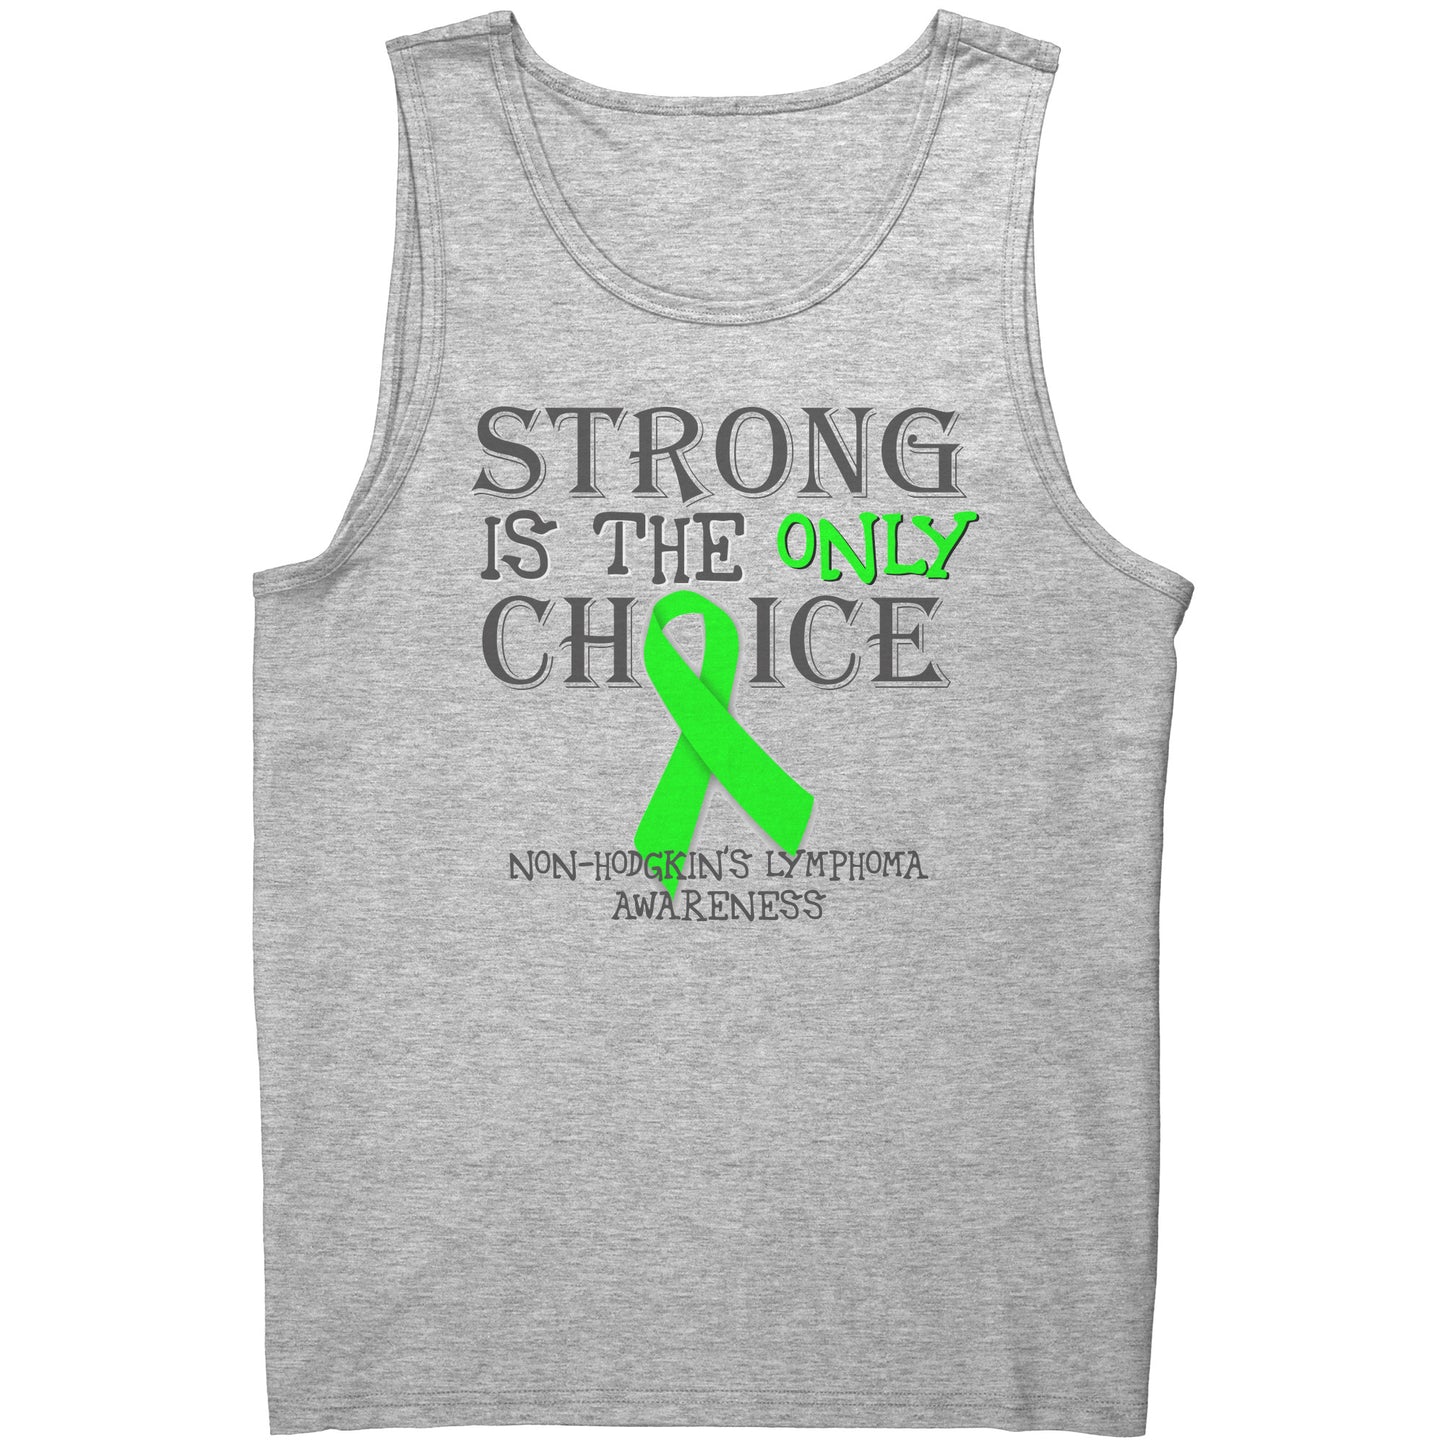 Strong is the Only Choice -Non-Hodgkin's Lymphoma Awareness T-Shirt, Hoodie, Tank